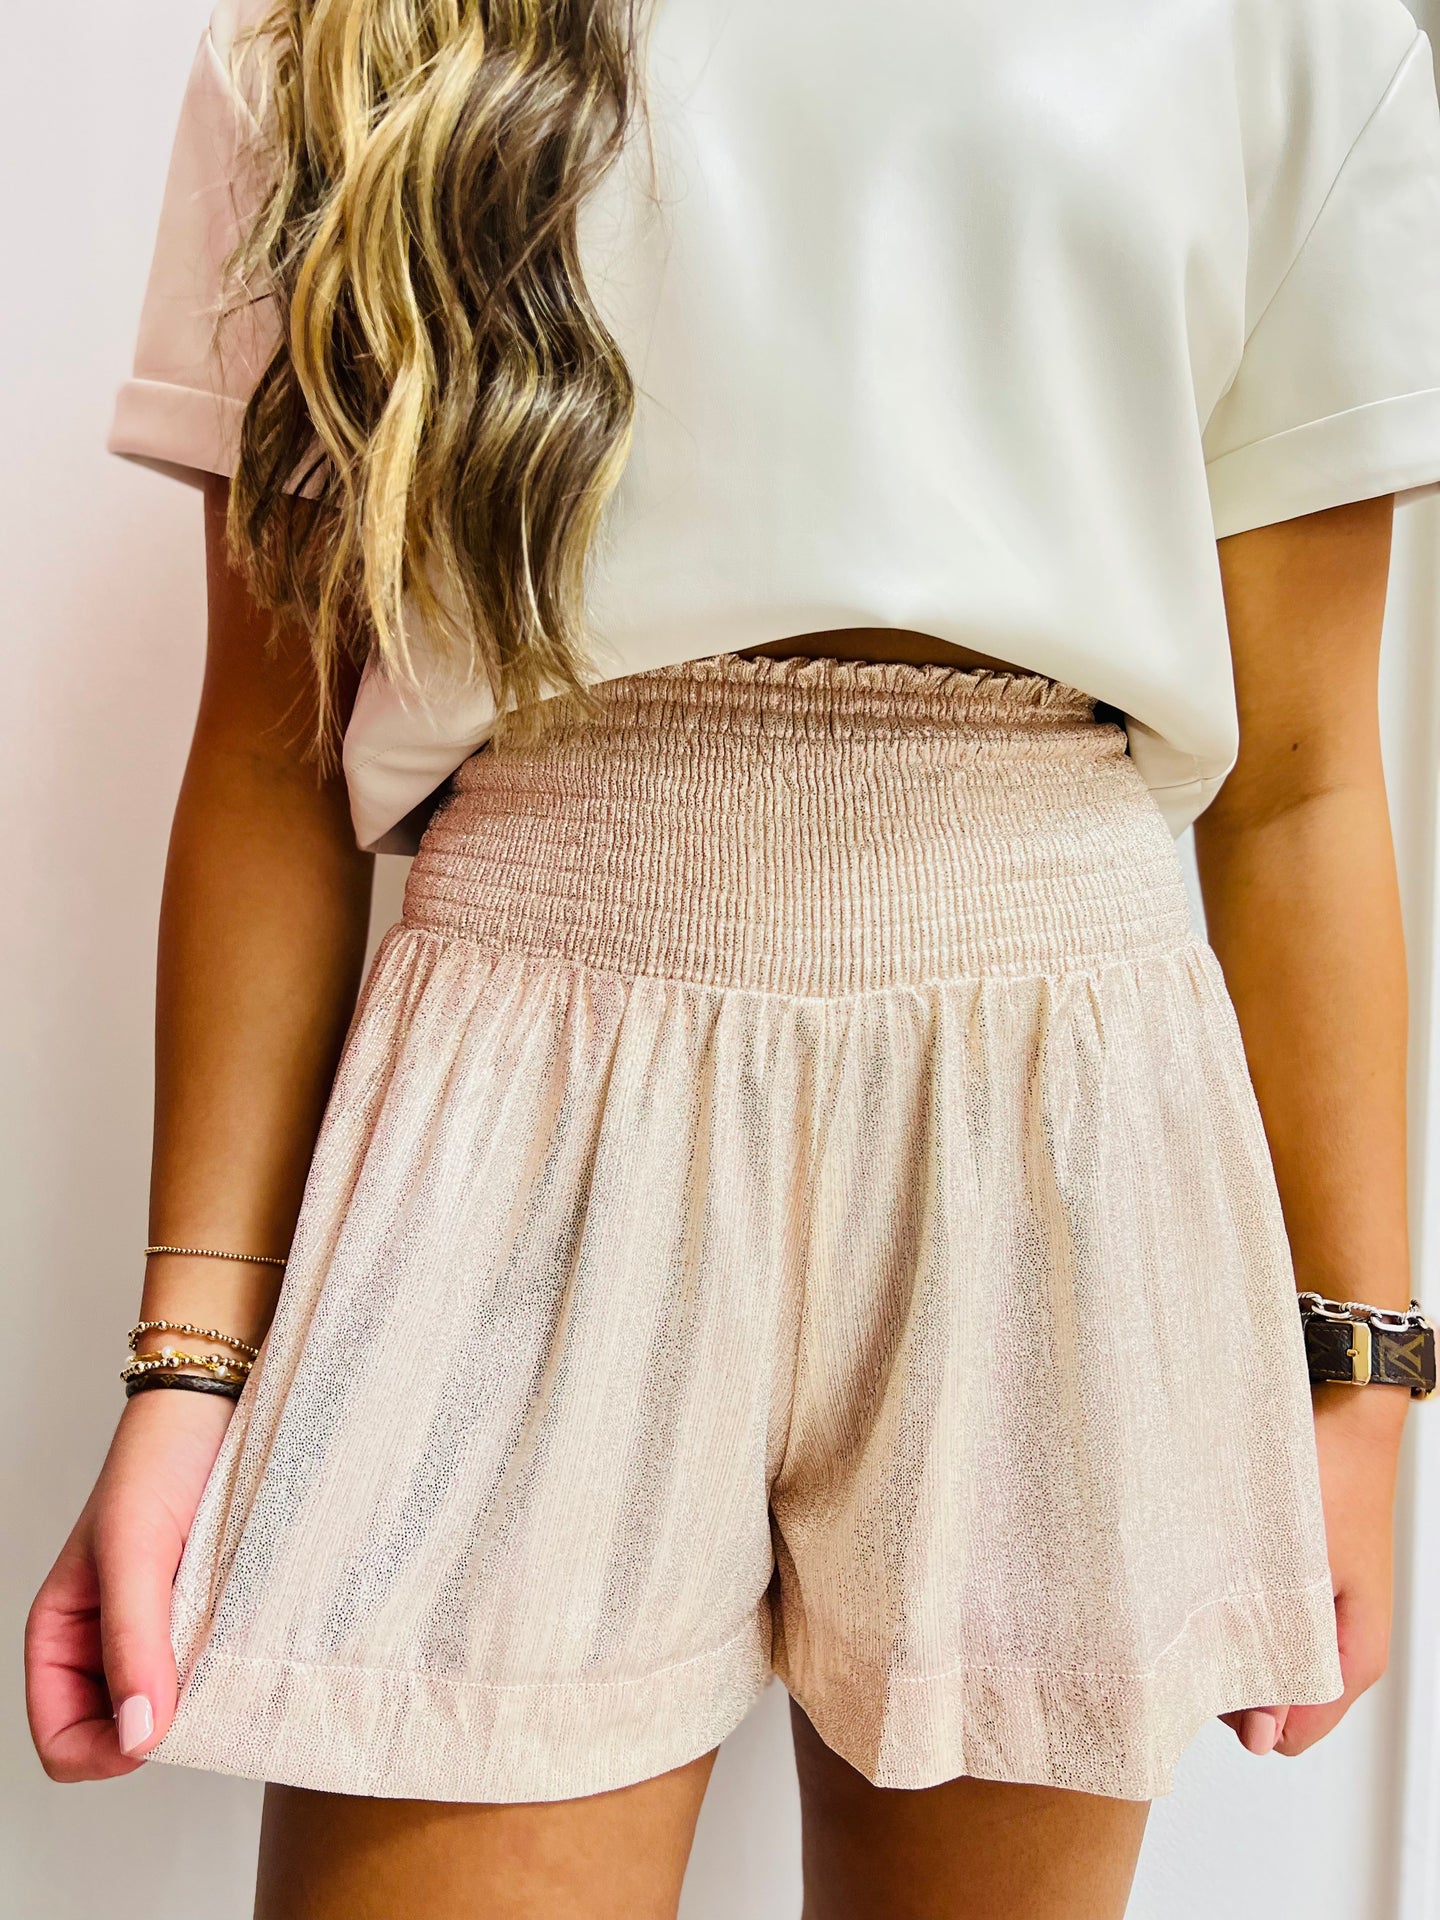 The Carlie Champagne Short